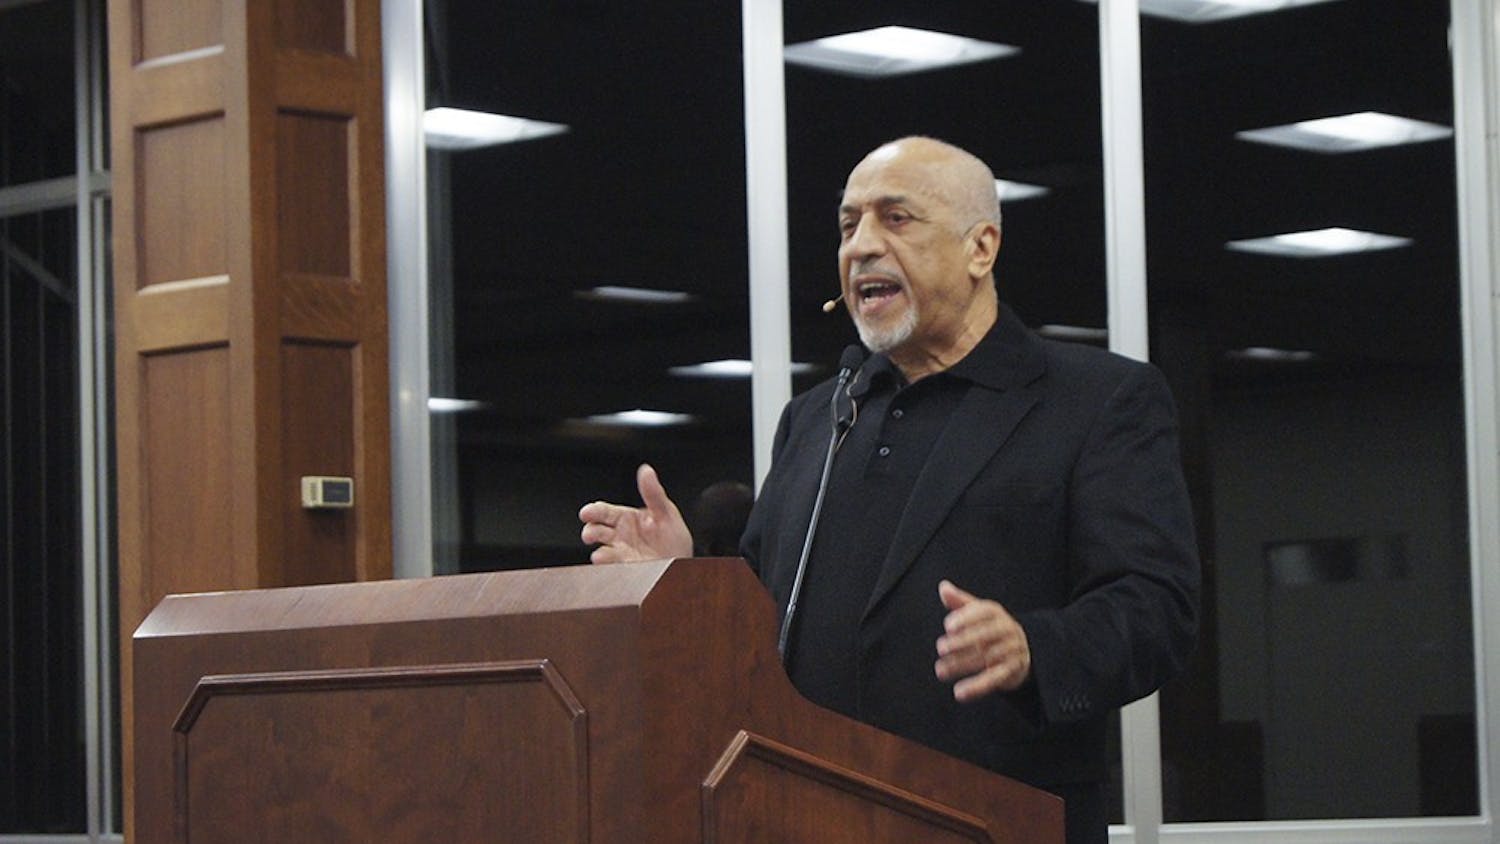 Claud Anderson talks about the relation between race and economics throughout world history Tuesday in the Indiana Memorial Union.